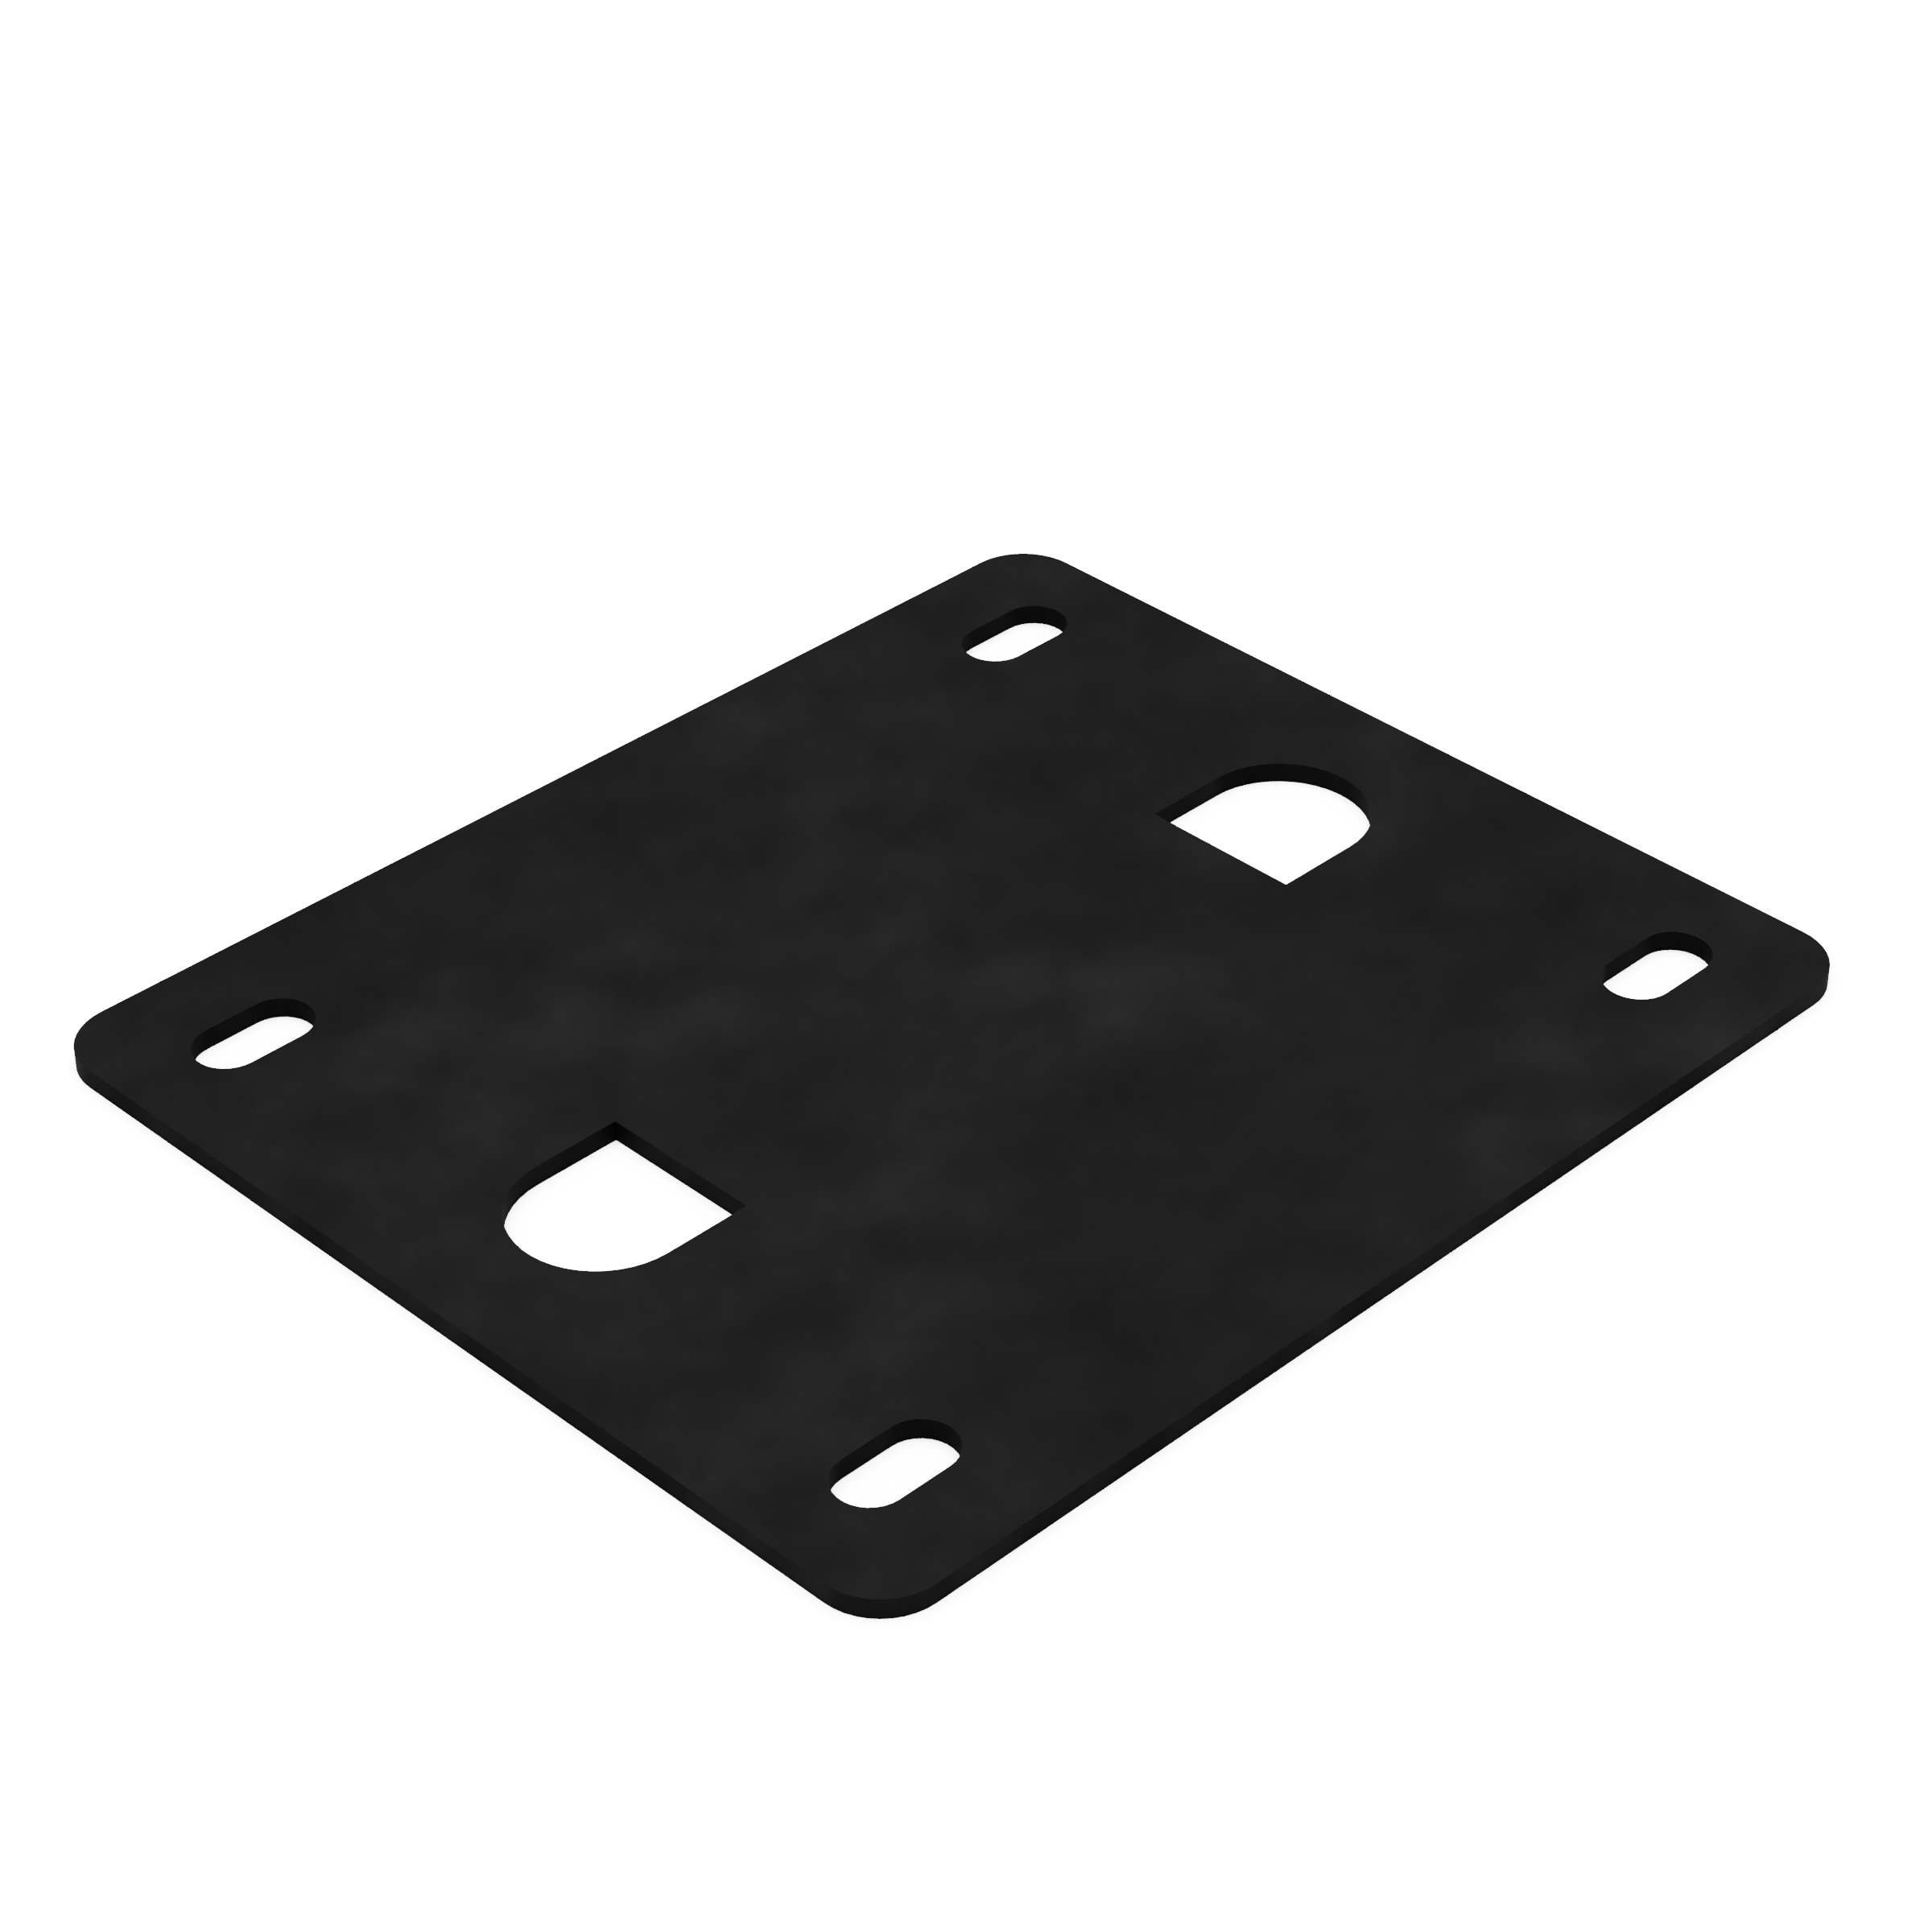 EI125 x 2" Vertical End Bell Mounting Pad/Insulator